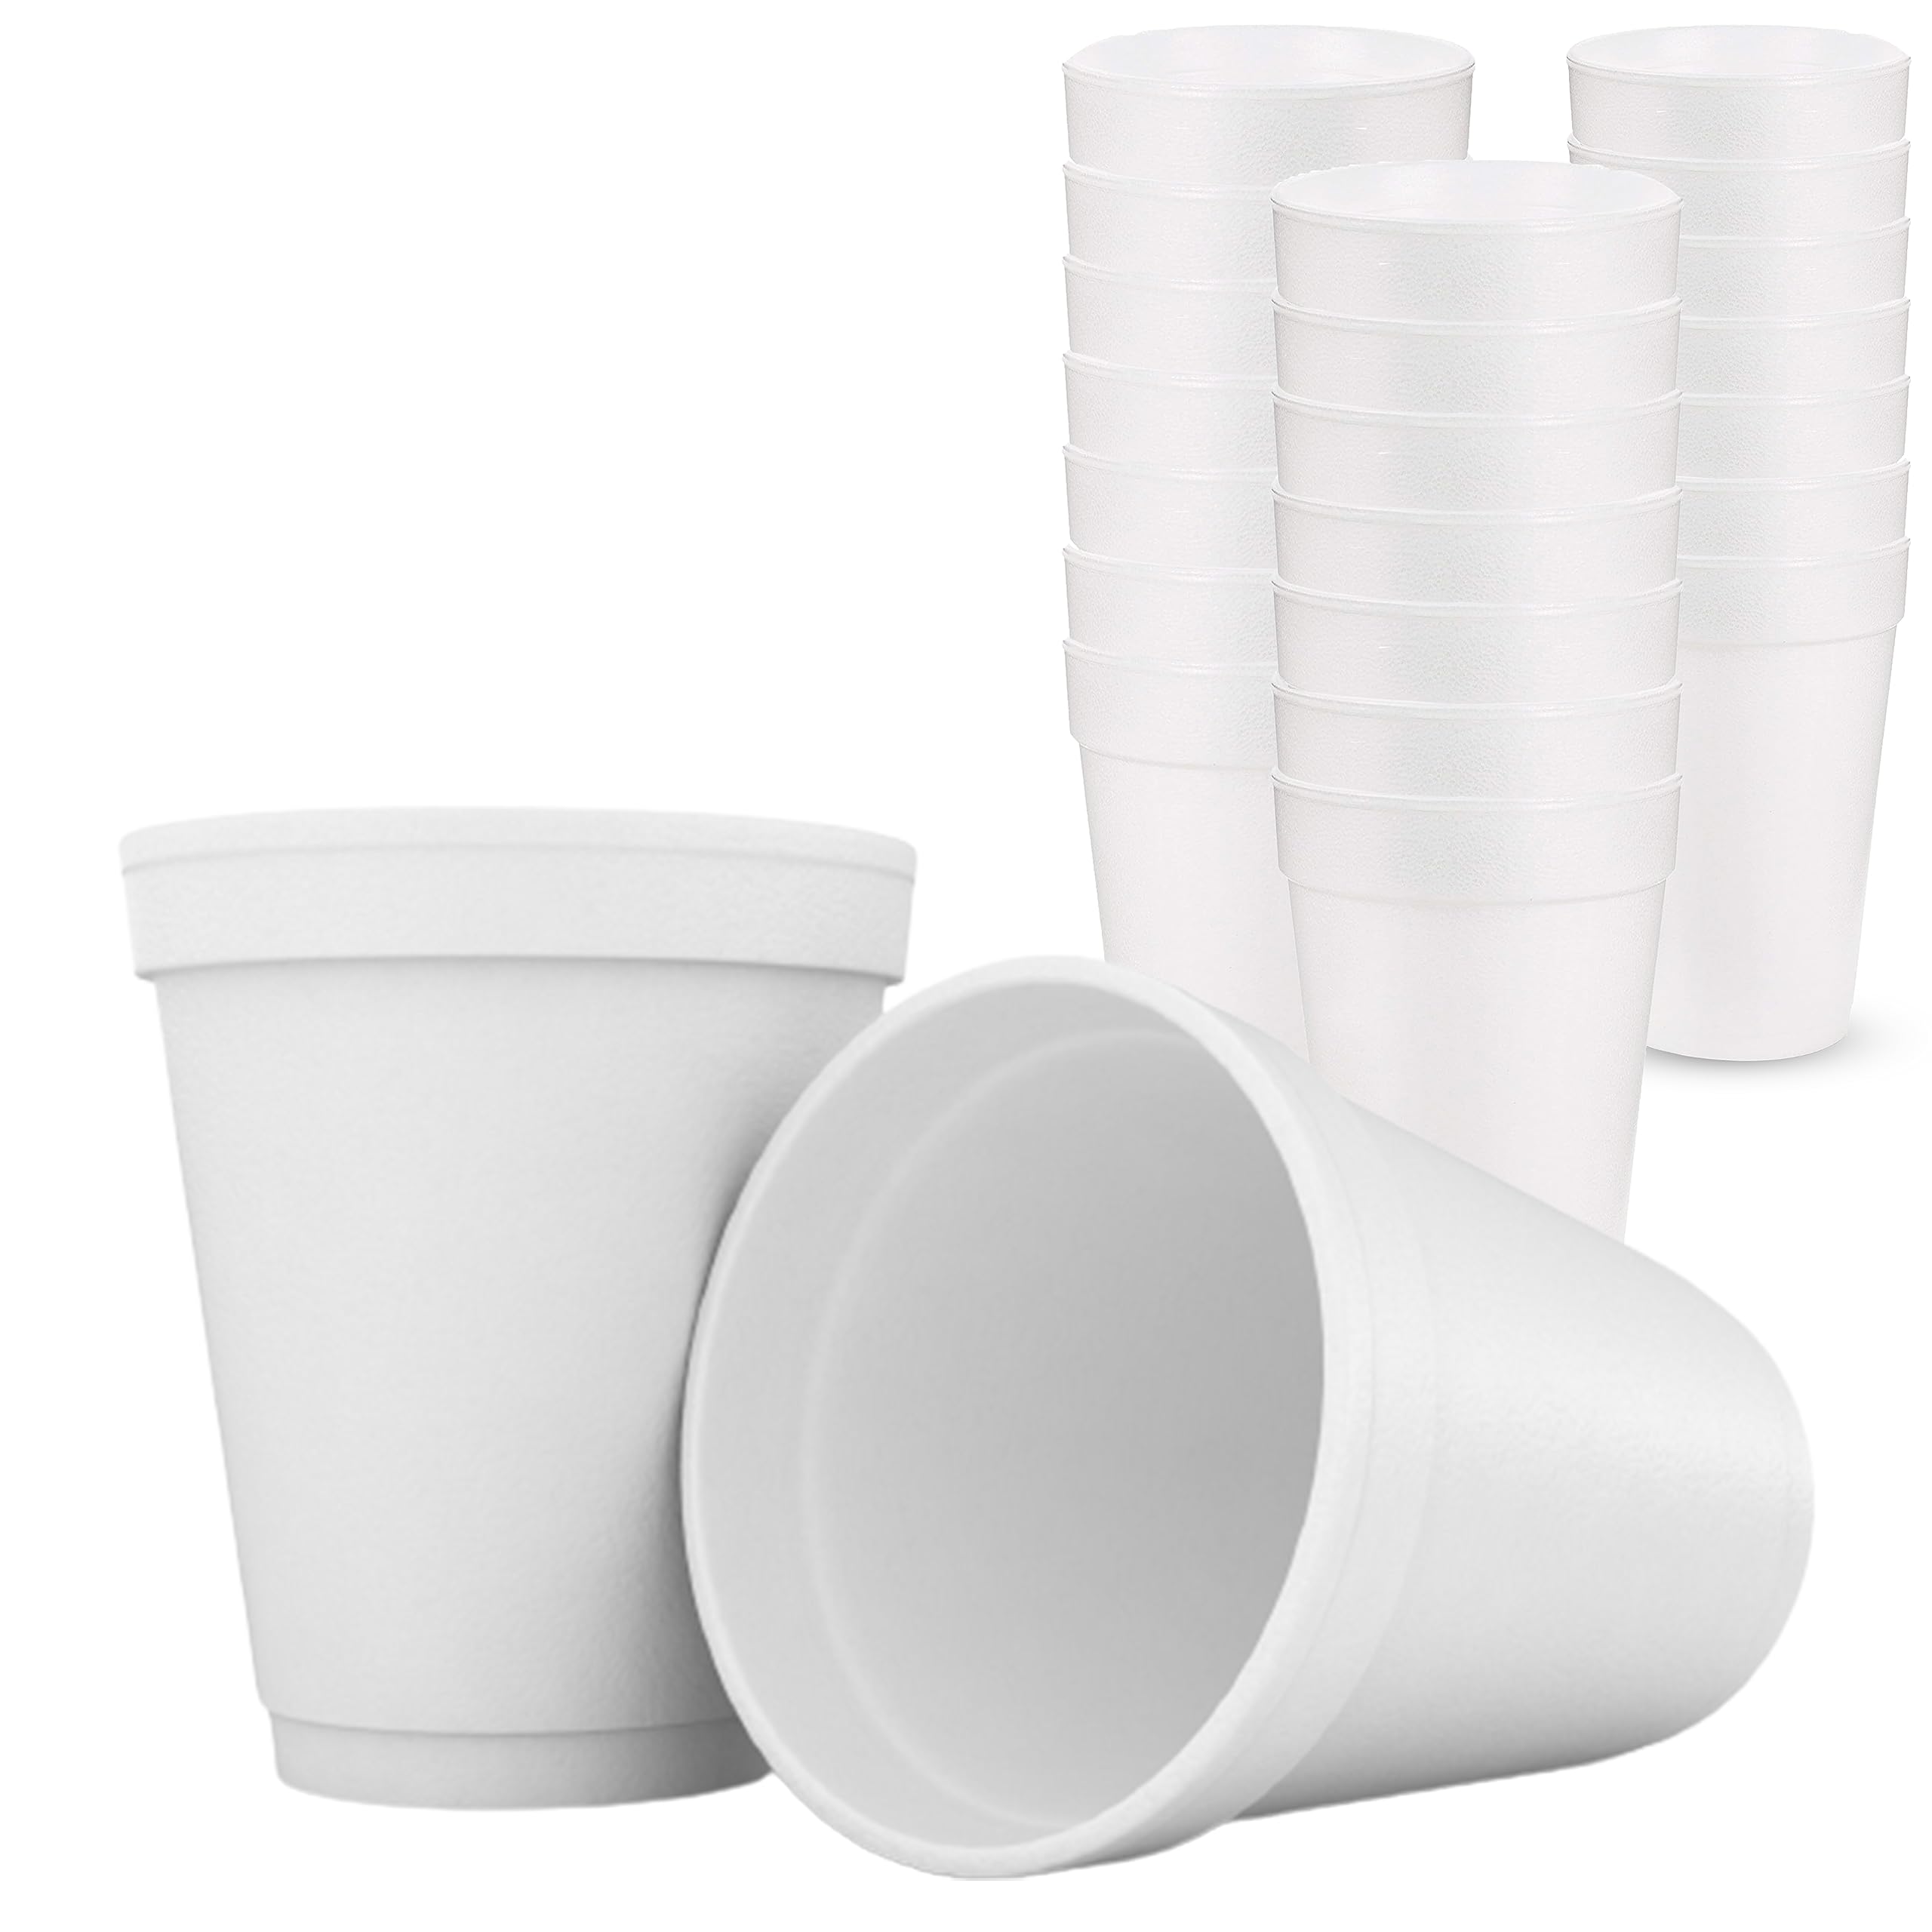 Concession Essentials 12oz Disposable White Foam Cups - Pack of 100ct (CE-Foam Cups 12-100ct)